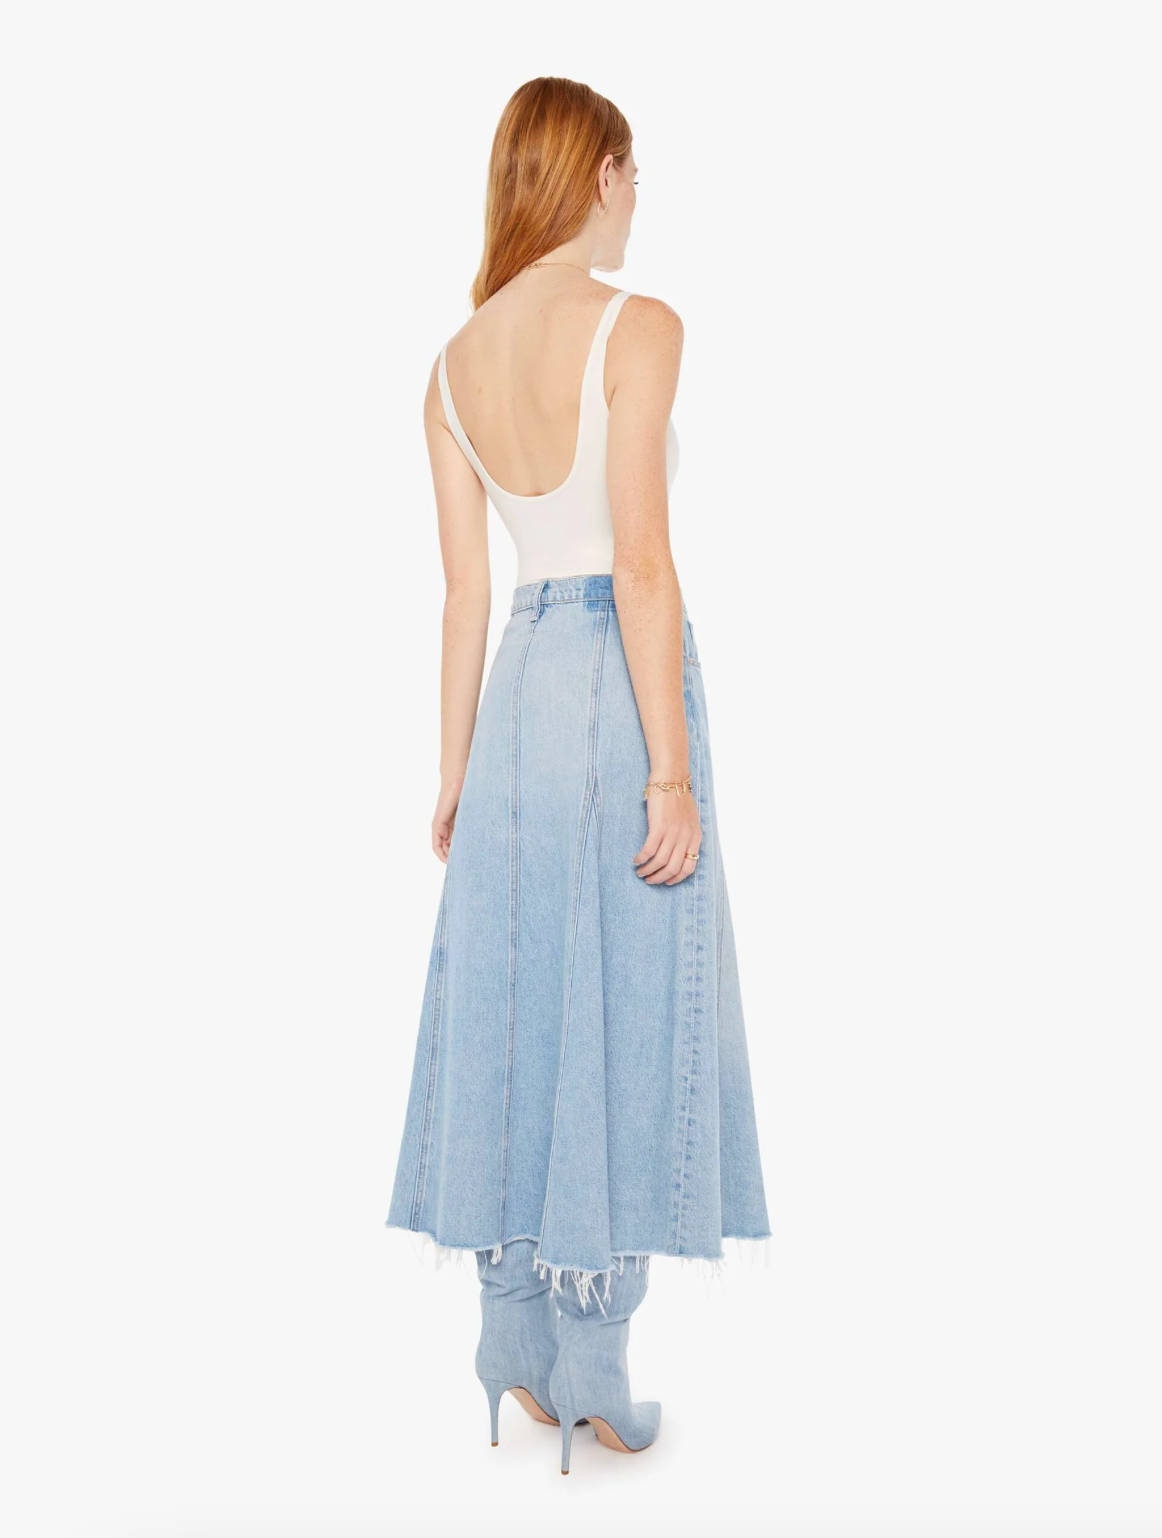 The woman is wearing The Full Swing I'm With The Band tank top with a long blue denim skirt with frayed edges, paired with blue high-heeled shoes styled for an Arizona look. She is standing on a plain white background.